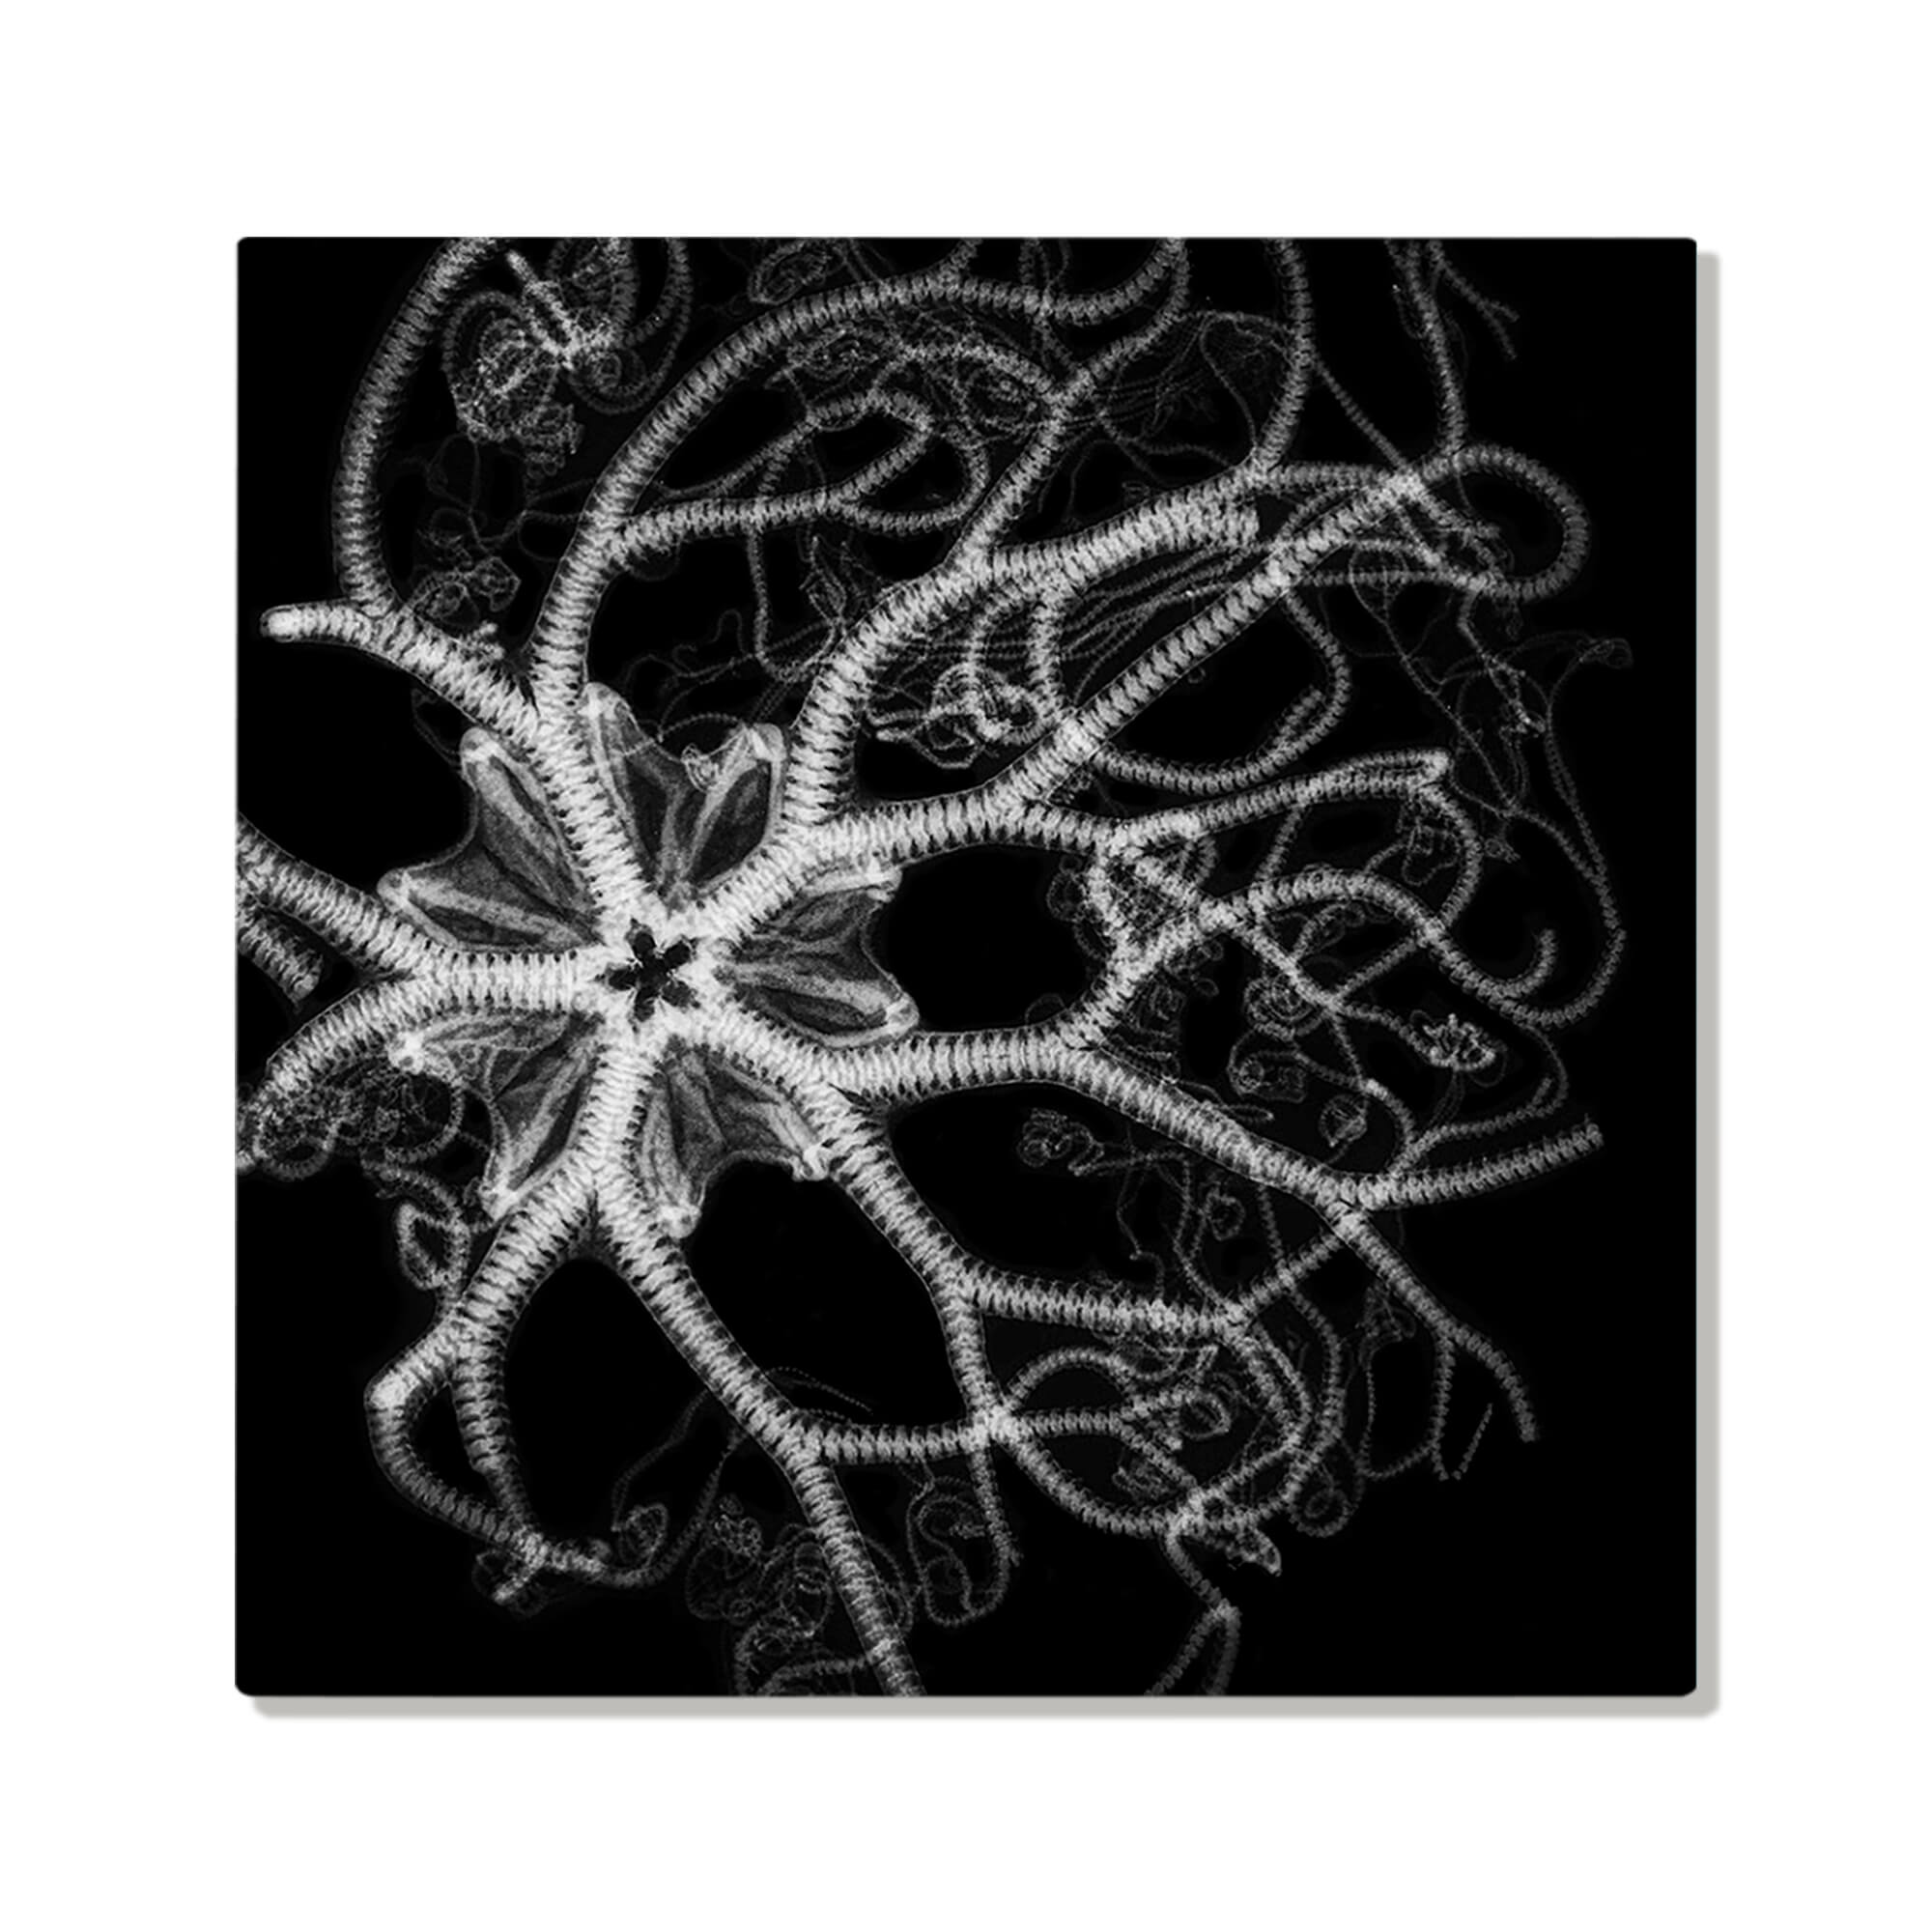 Metal art print of a grayscale art print of a basket star by Hawaii artist Michelle Smith